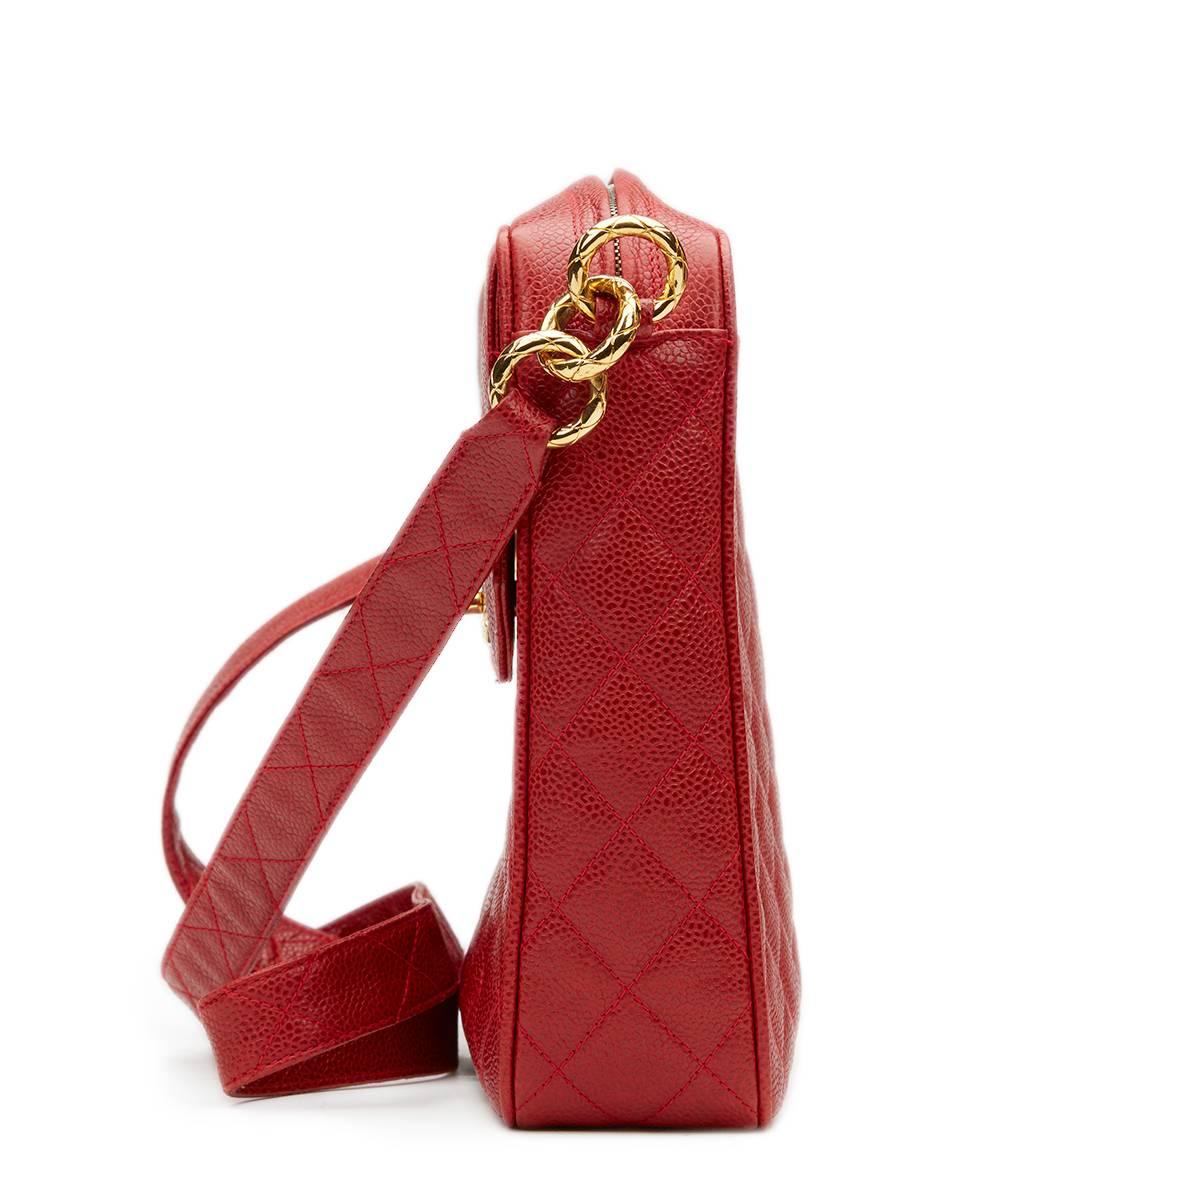 CHANEL
Red Quilted Caviar Leather Vintage Timeless Shoulder Bag

This CHANEL Timeless Shoulder Bag is in Excellent Pre-Owned Condition accompanied by Chanel Dust Bag, Care Booklet. Circa 1994. Primarily made from Caviar Leather complimented by Gold